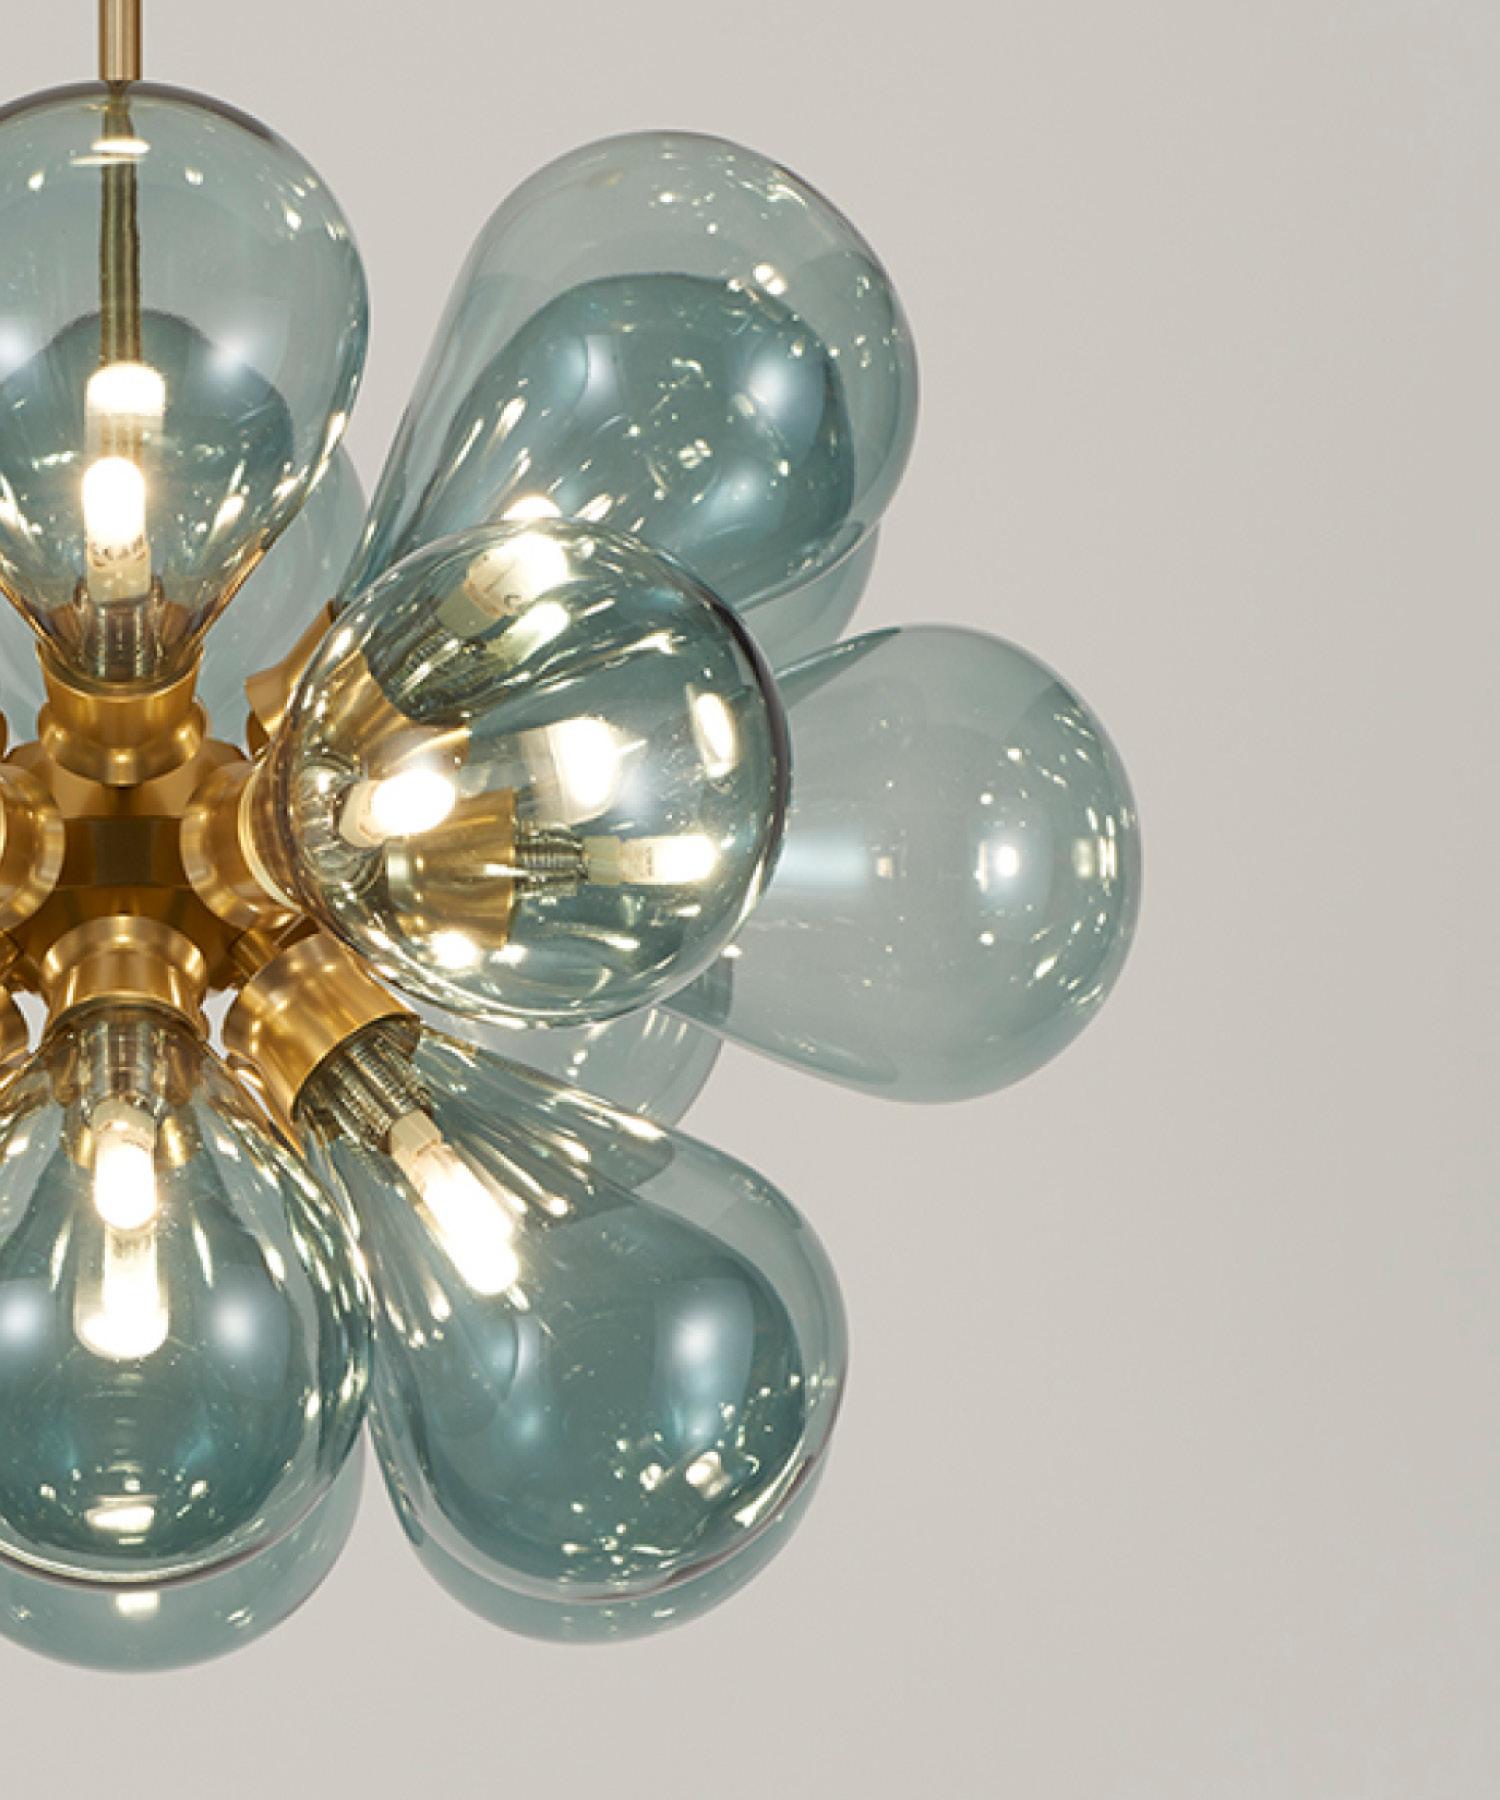 Cintola Maxi Pendant in Satin Gold with 18 Handblown Frosted Glass Globes For Sale 4